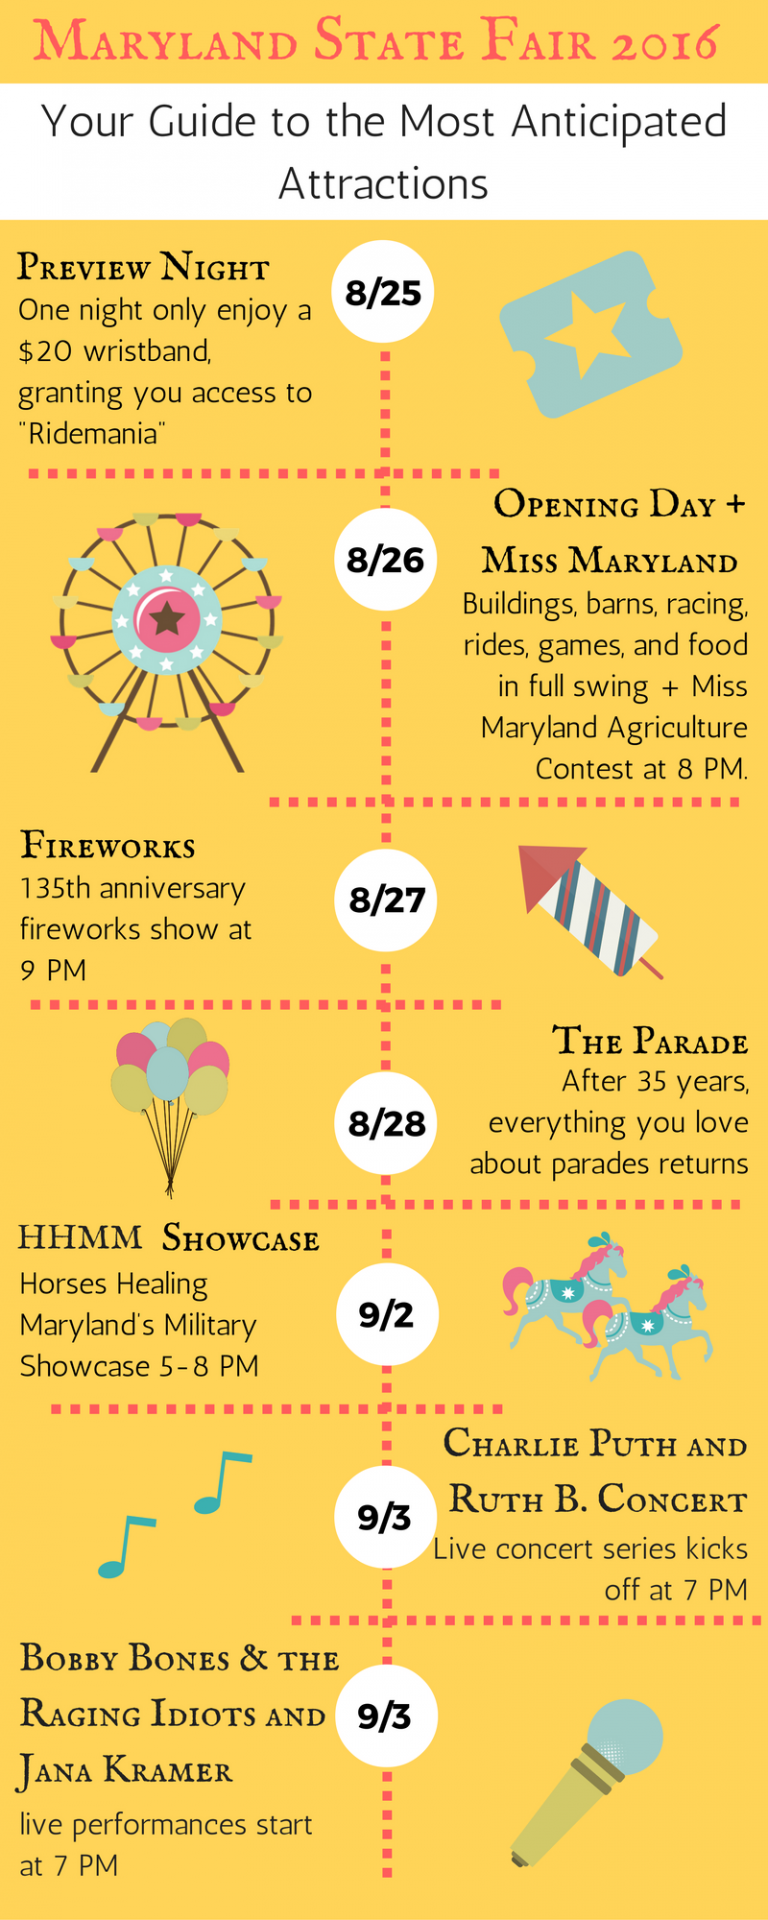 The Maryland State Fair and 7 Events, you won’t want to miss in 2016